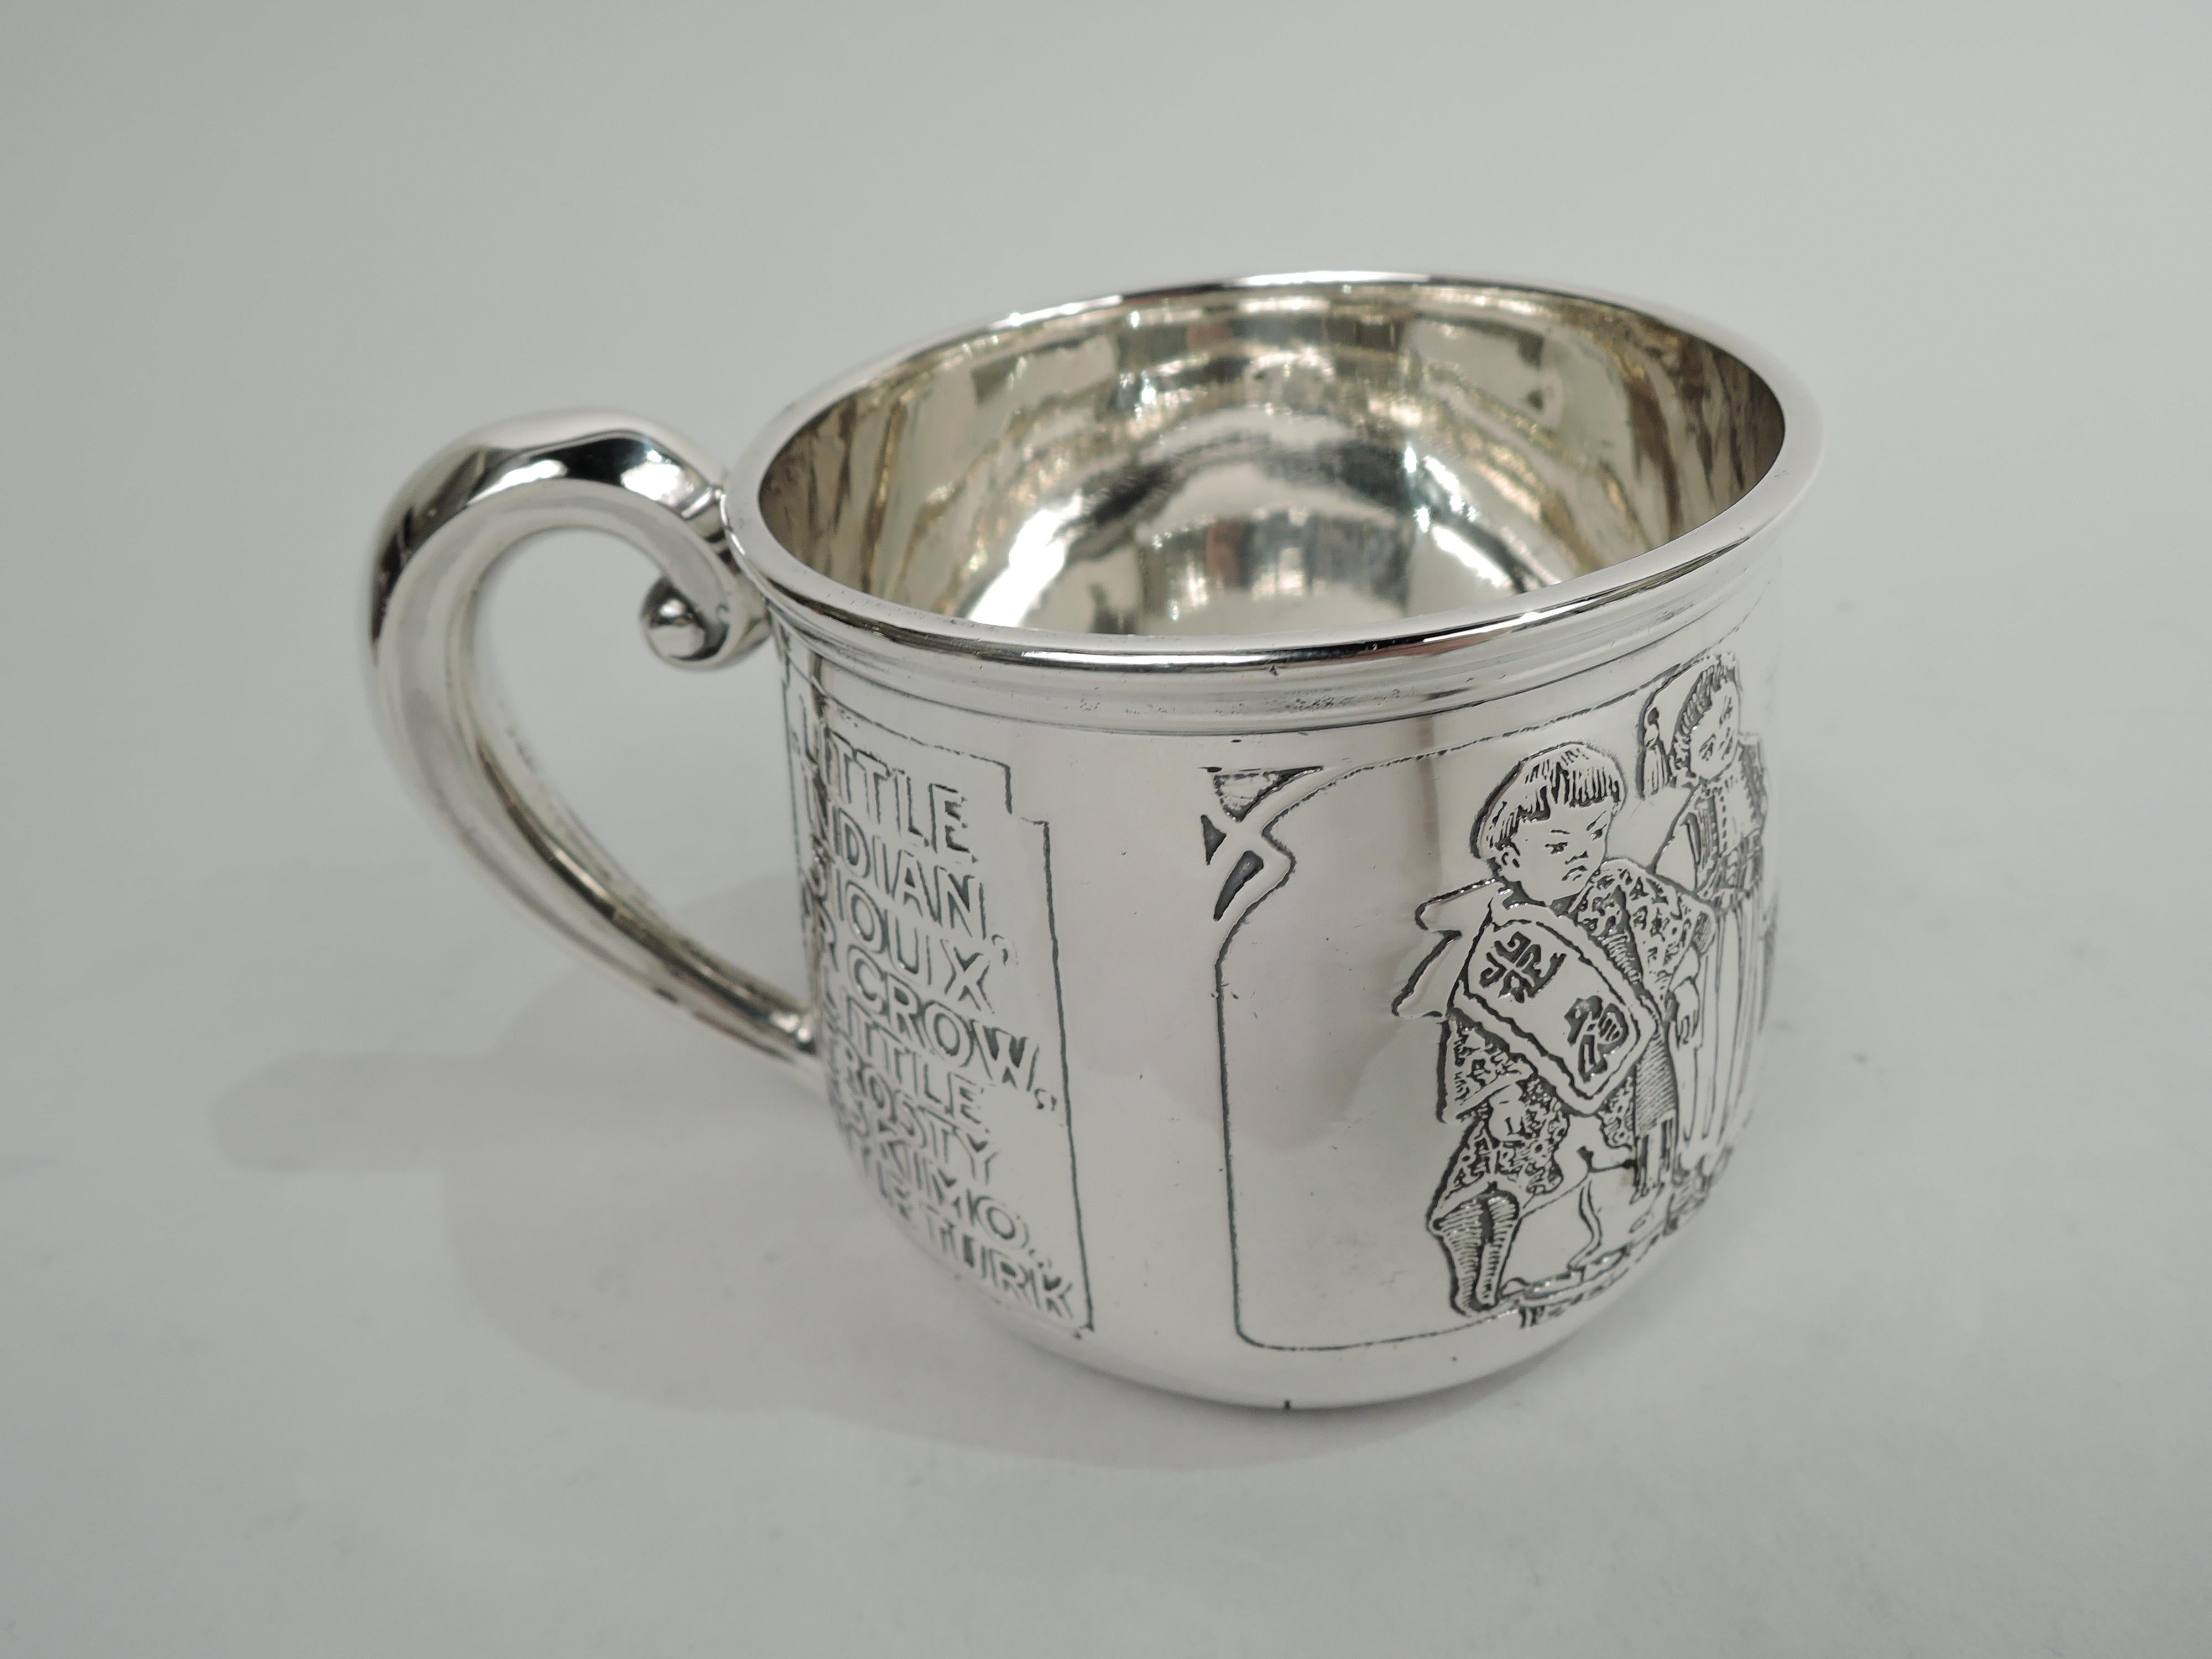 Turn-of-the-century sterling silver baby cup rich in period assumptions. Made by William B. Kerr in Newark. Upward tapering sides and scroll handle.

Acid-etched frieze depicting sailor-suited, flag-holding, all-American boy with exotic coevals in